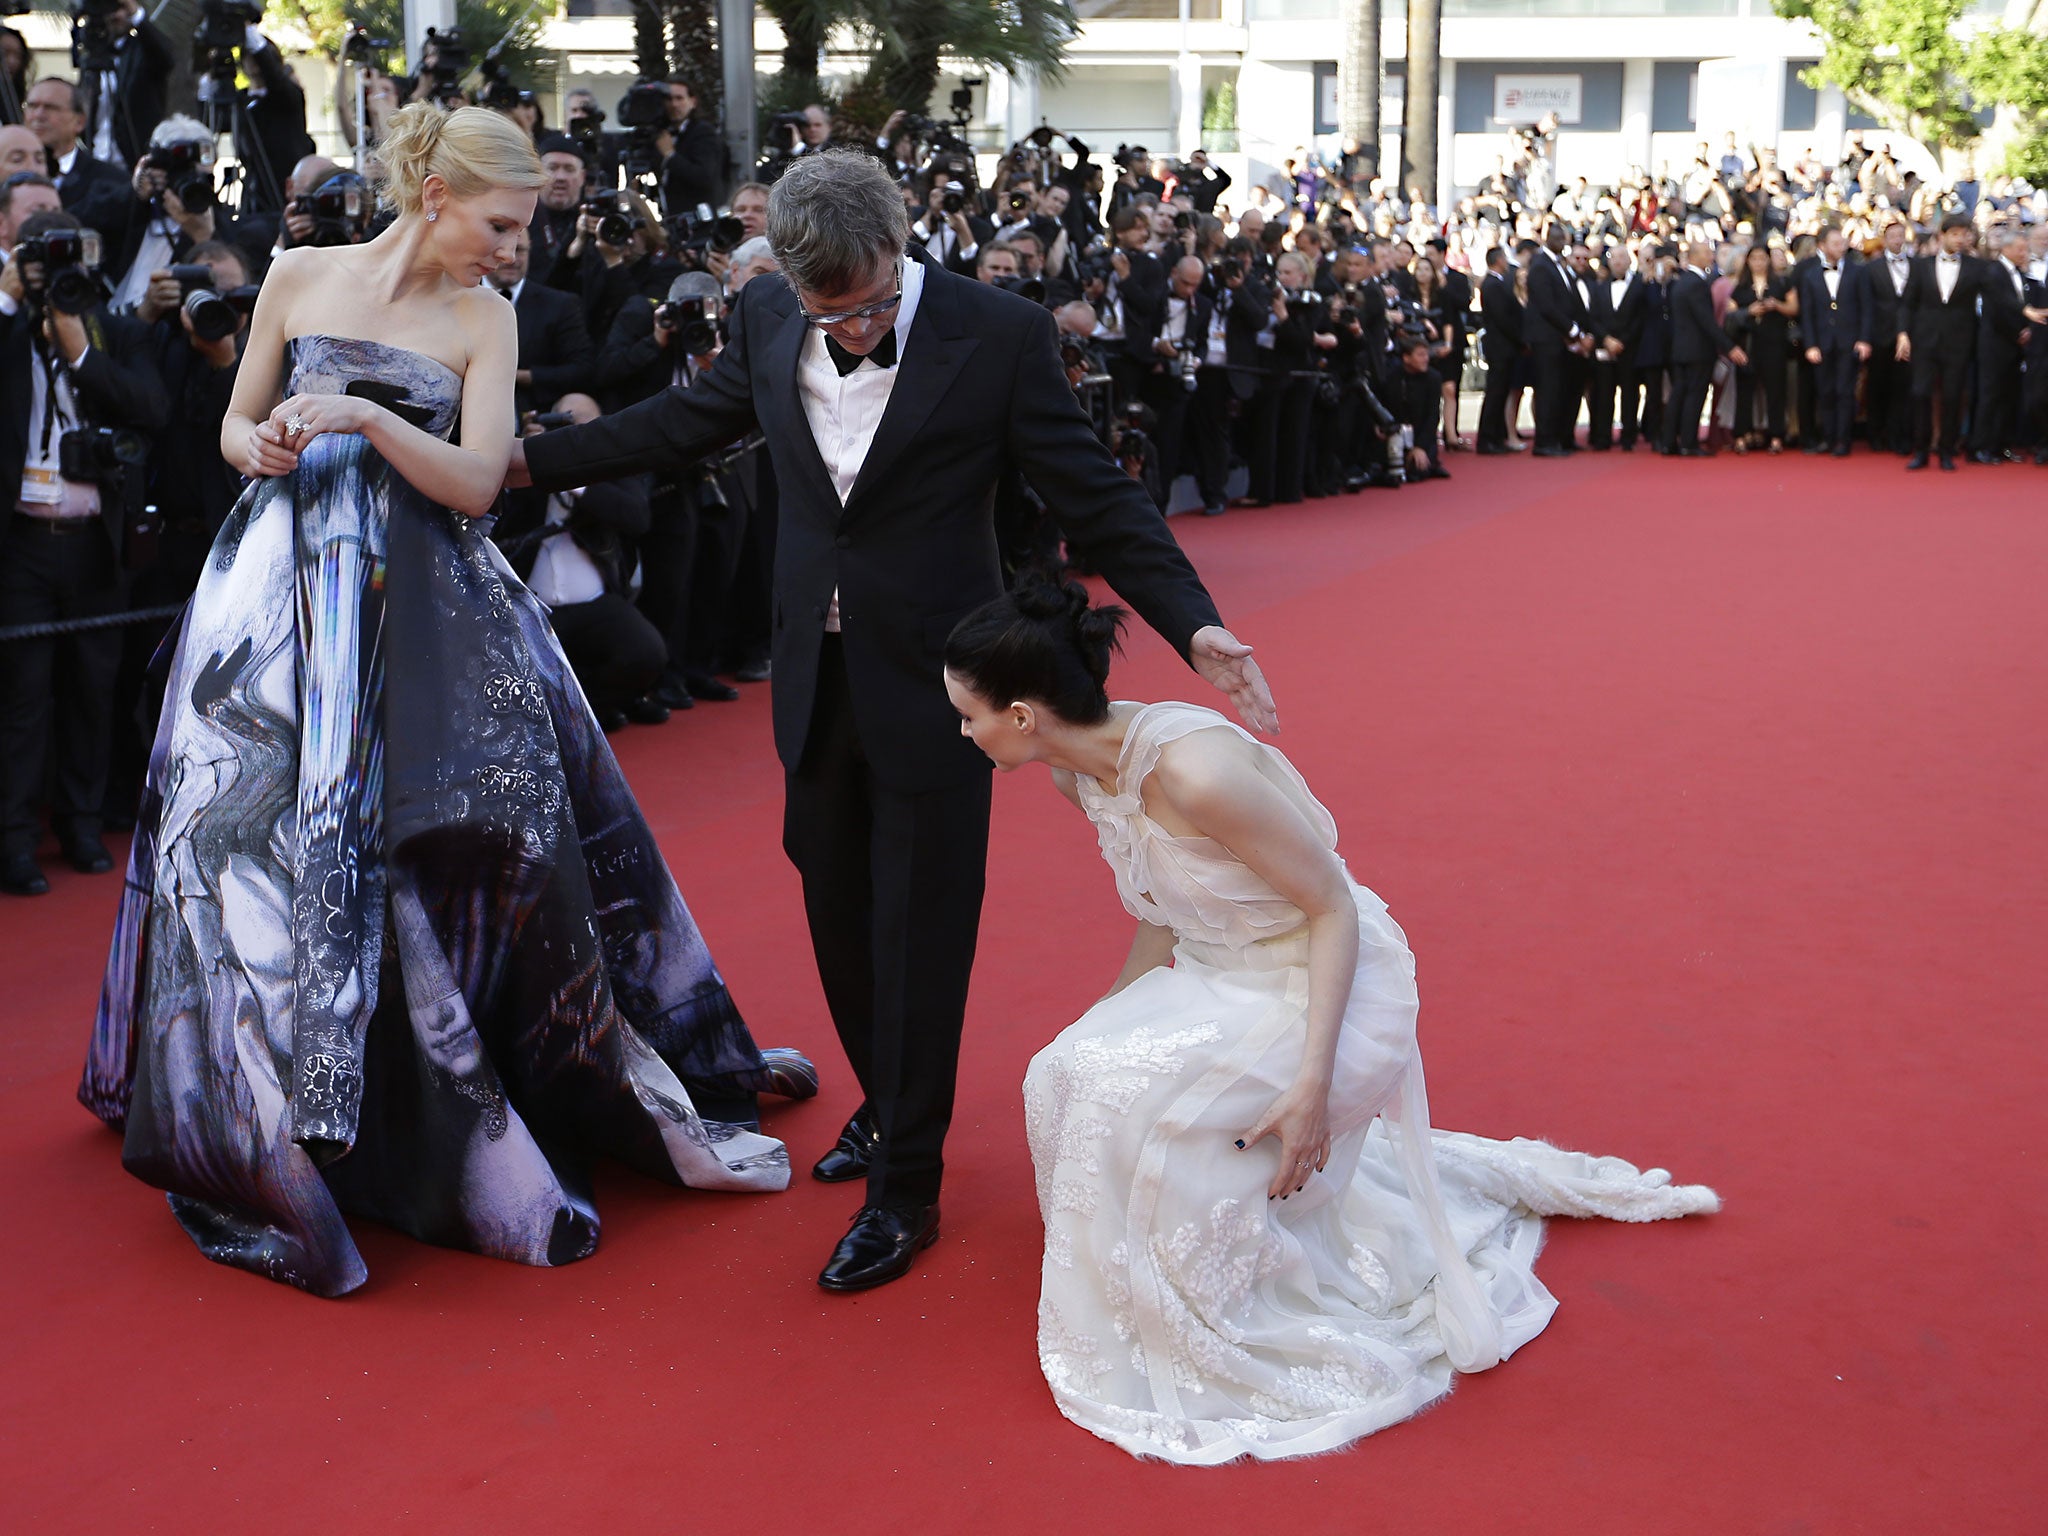 Cate Blanchett and director Todd Haynes turn to help Rooney Mara upon arrival for the screening of the film Carol at the Cannes Film Festival, 17 May 2015